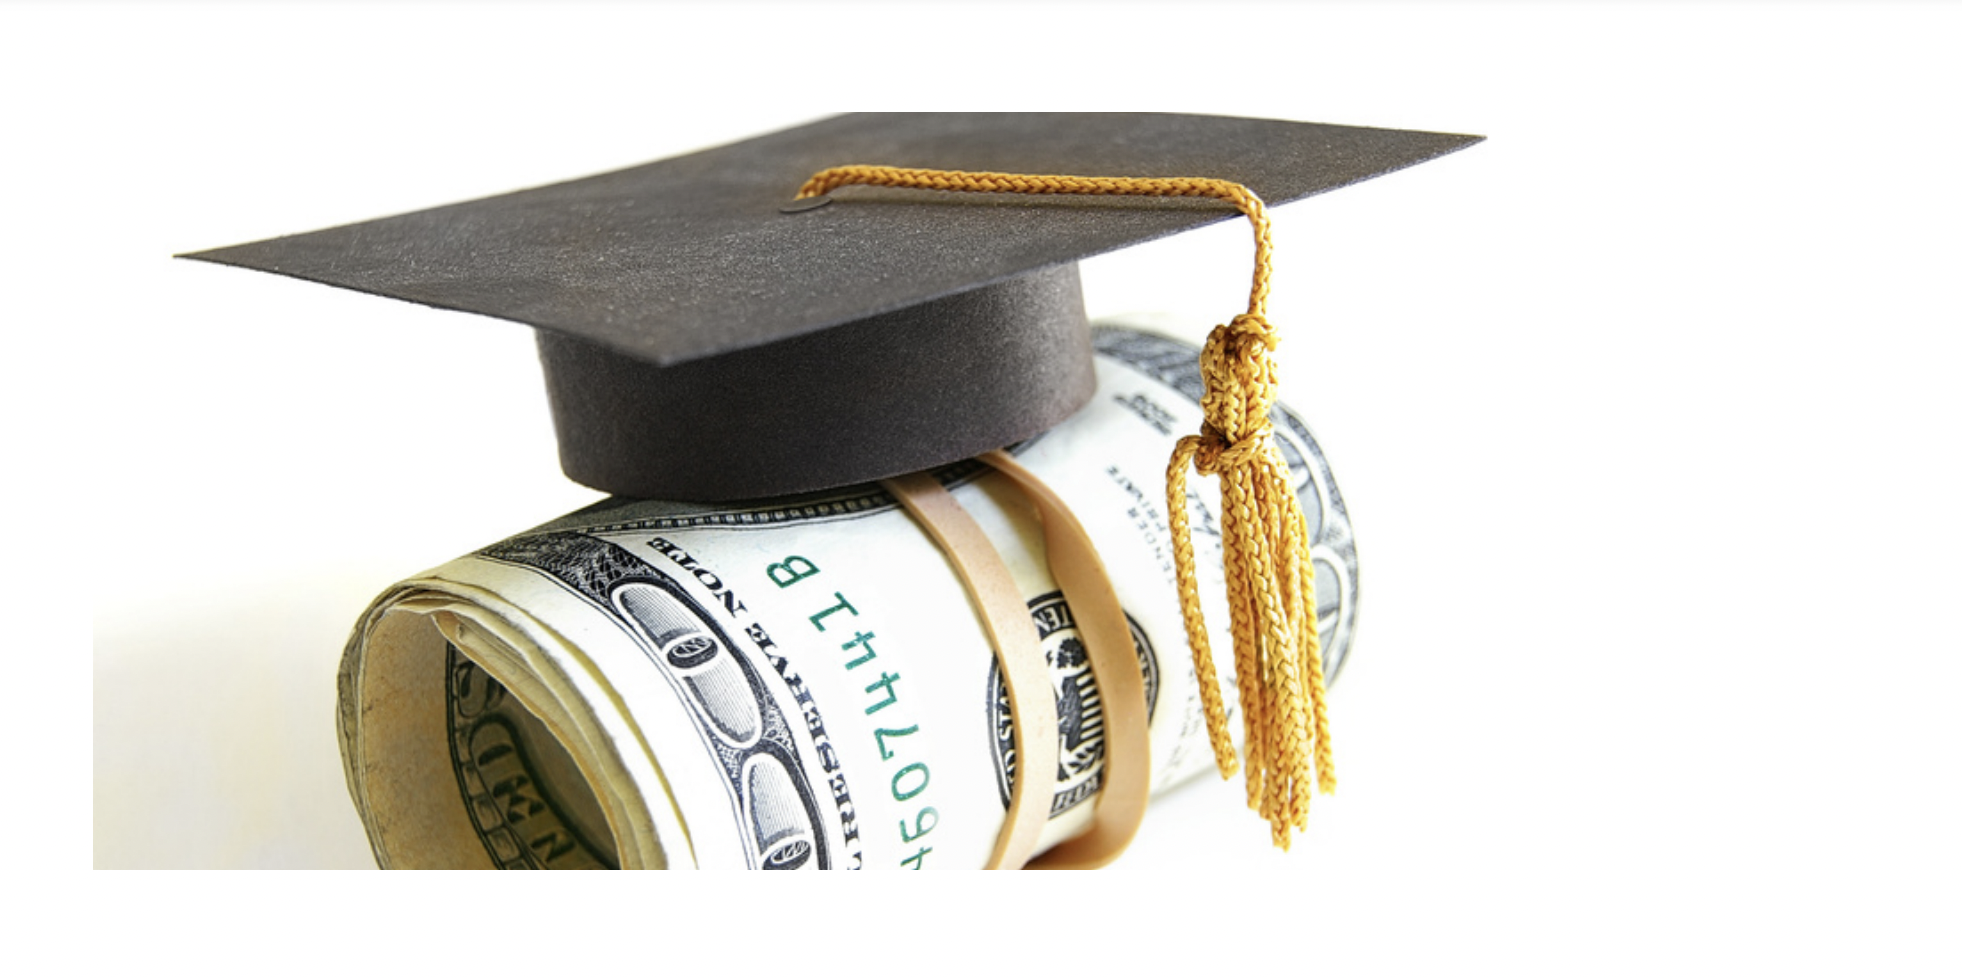 10 Financial Aid Facts To Celebrate Financial Aid Awareness Month